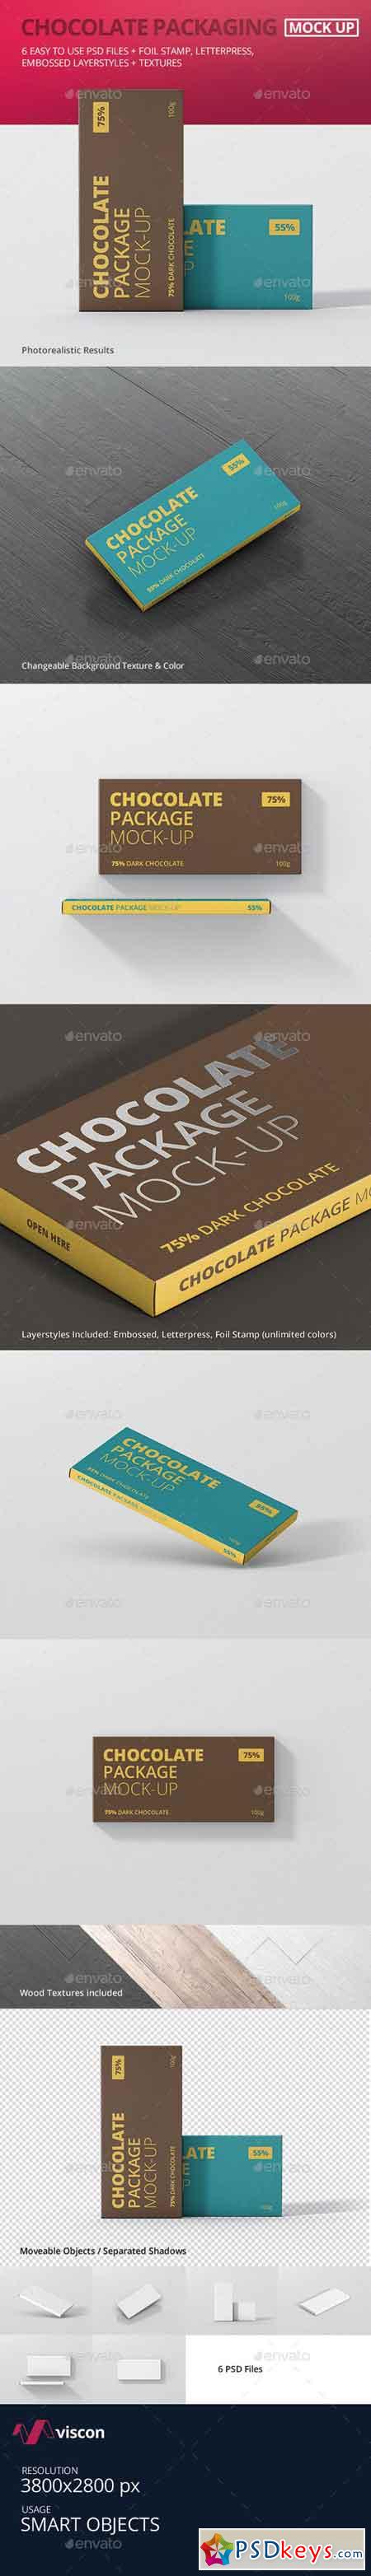 Download Chocolate Packaging Mock-Up 17772368 » Free Download Photoshop Vector Stock image Via Torrent ...